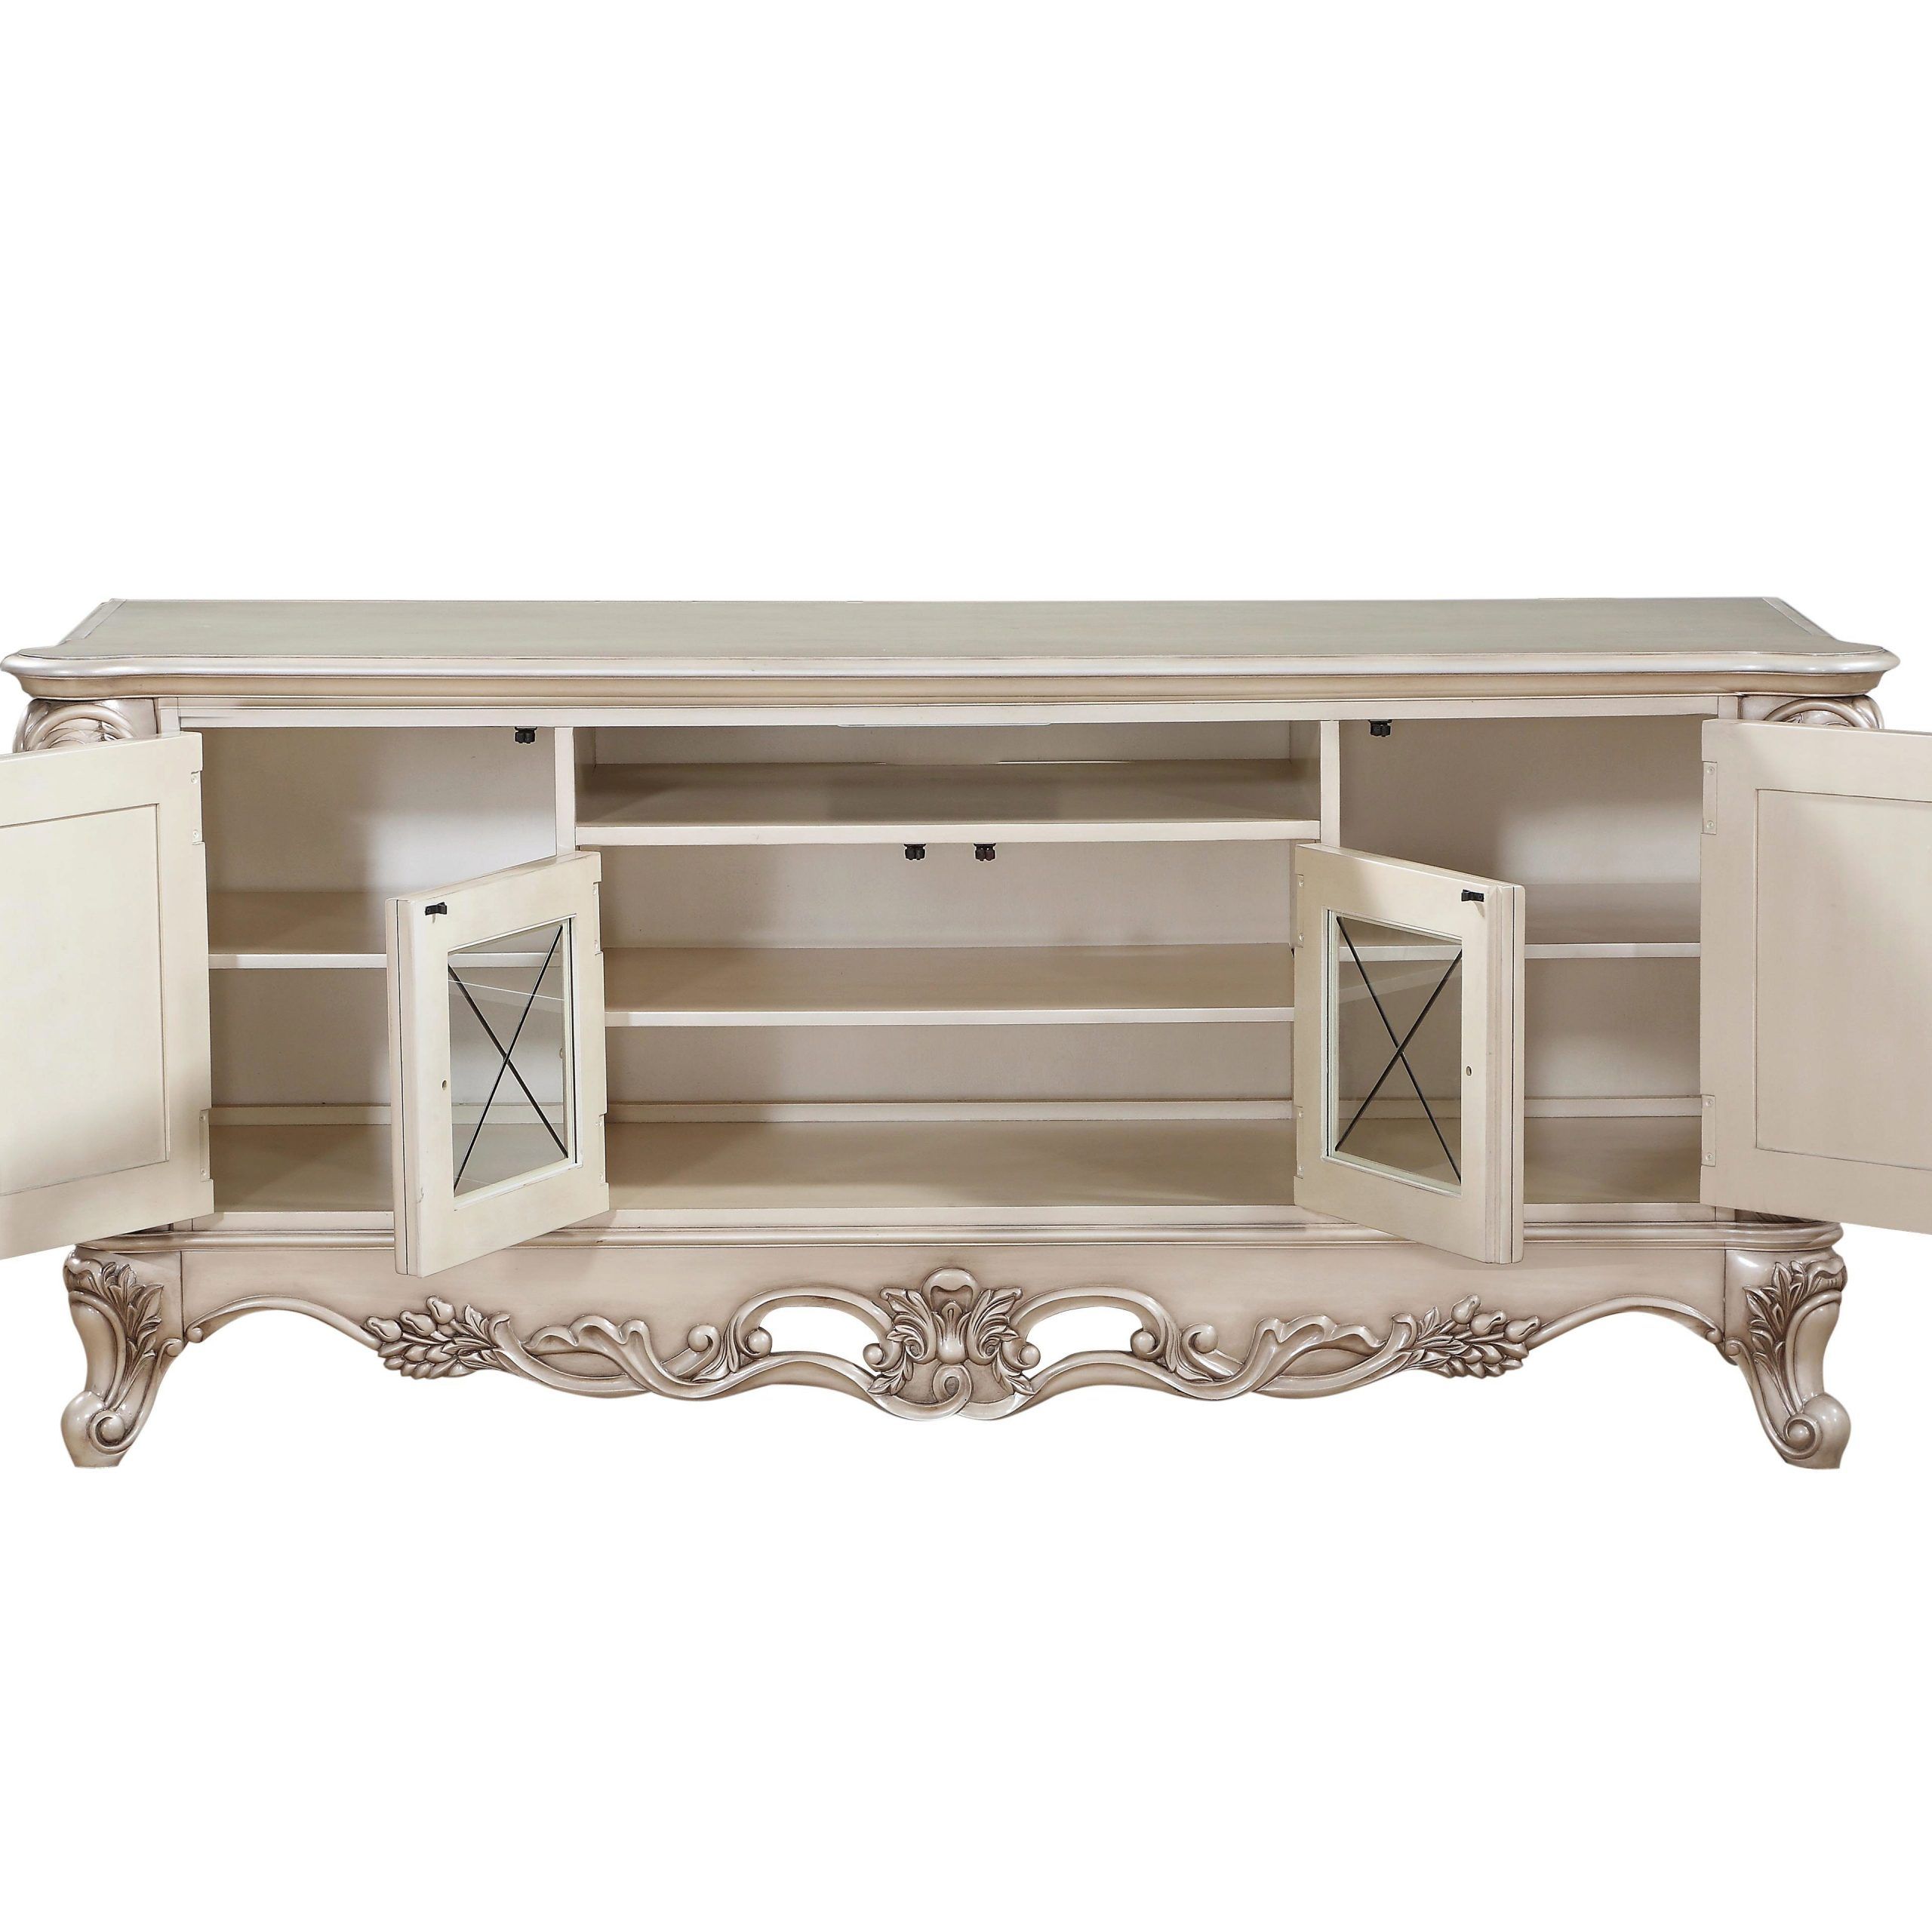 Luxury Tv Stand Gorsedd 91443 Antique White Carved Wood Intended For Luxury Tv Stands (View 13 of 15)